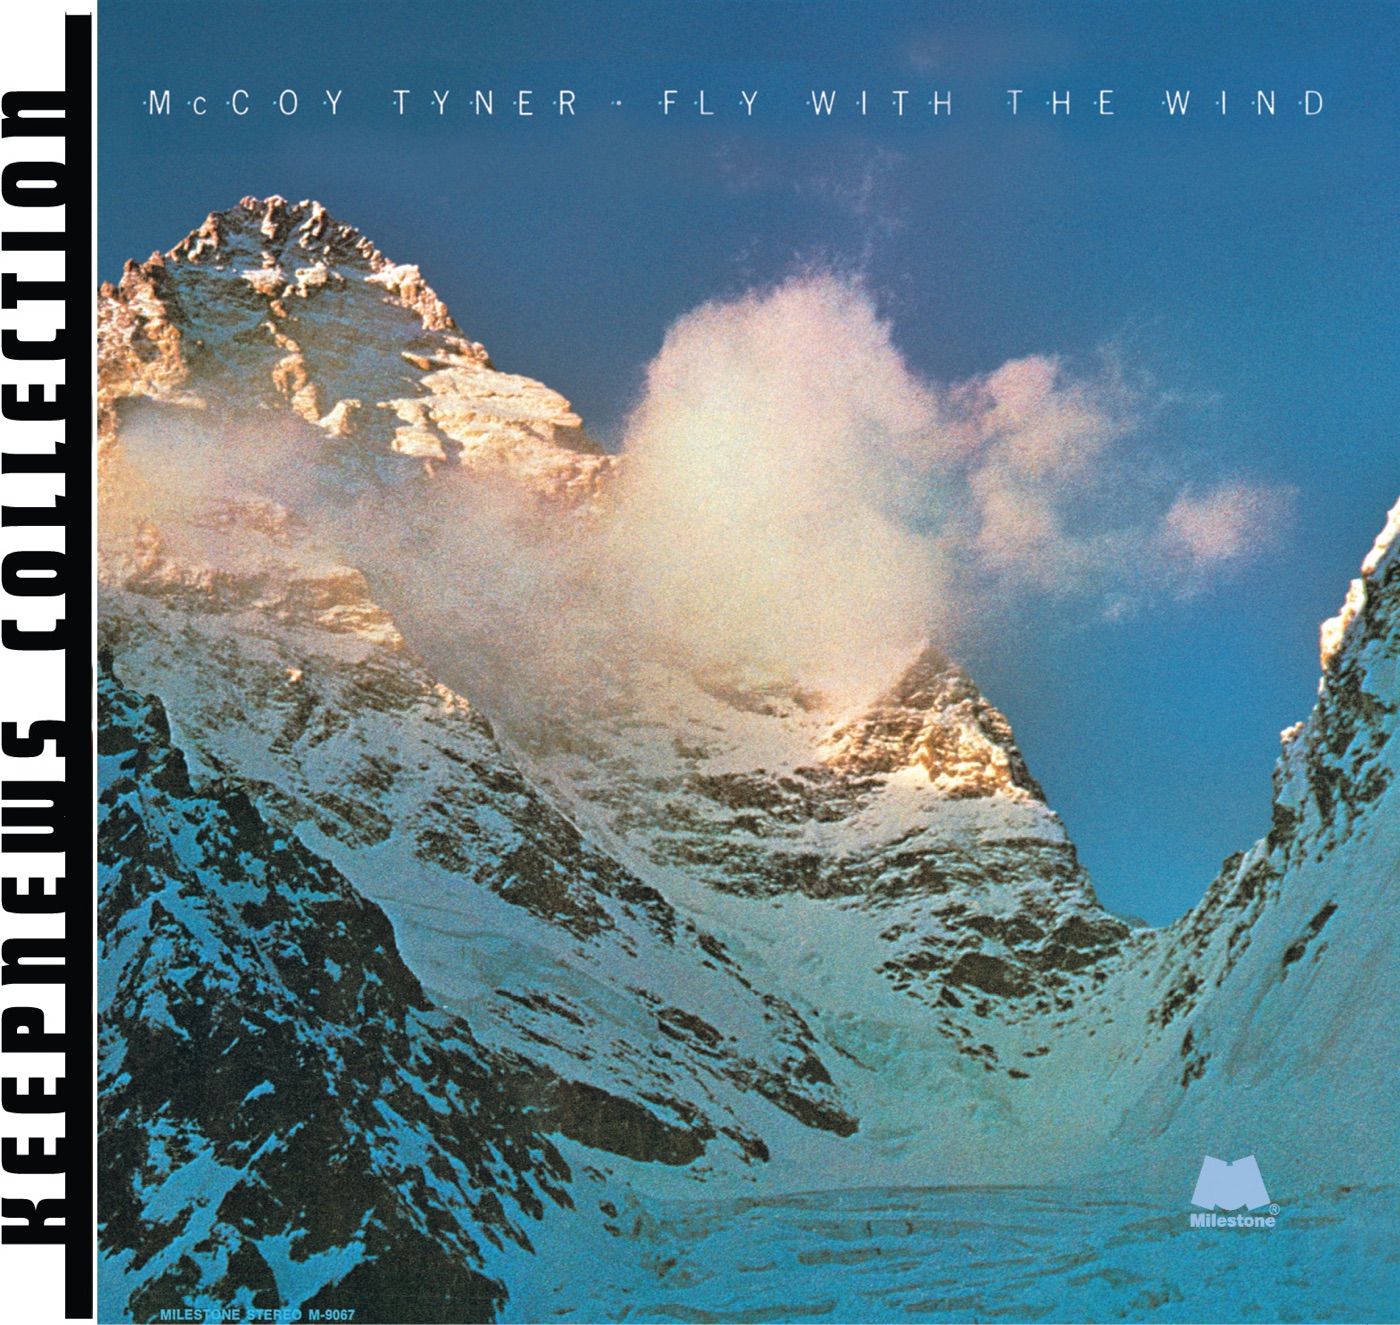 Fly With the Wind by McCoy Tyner